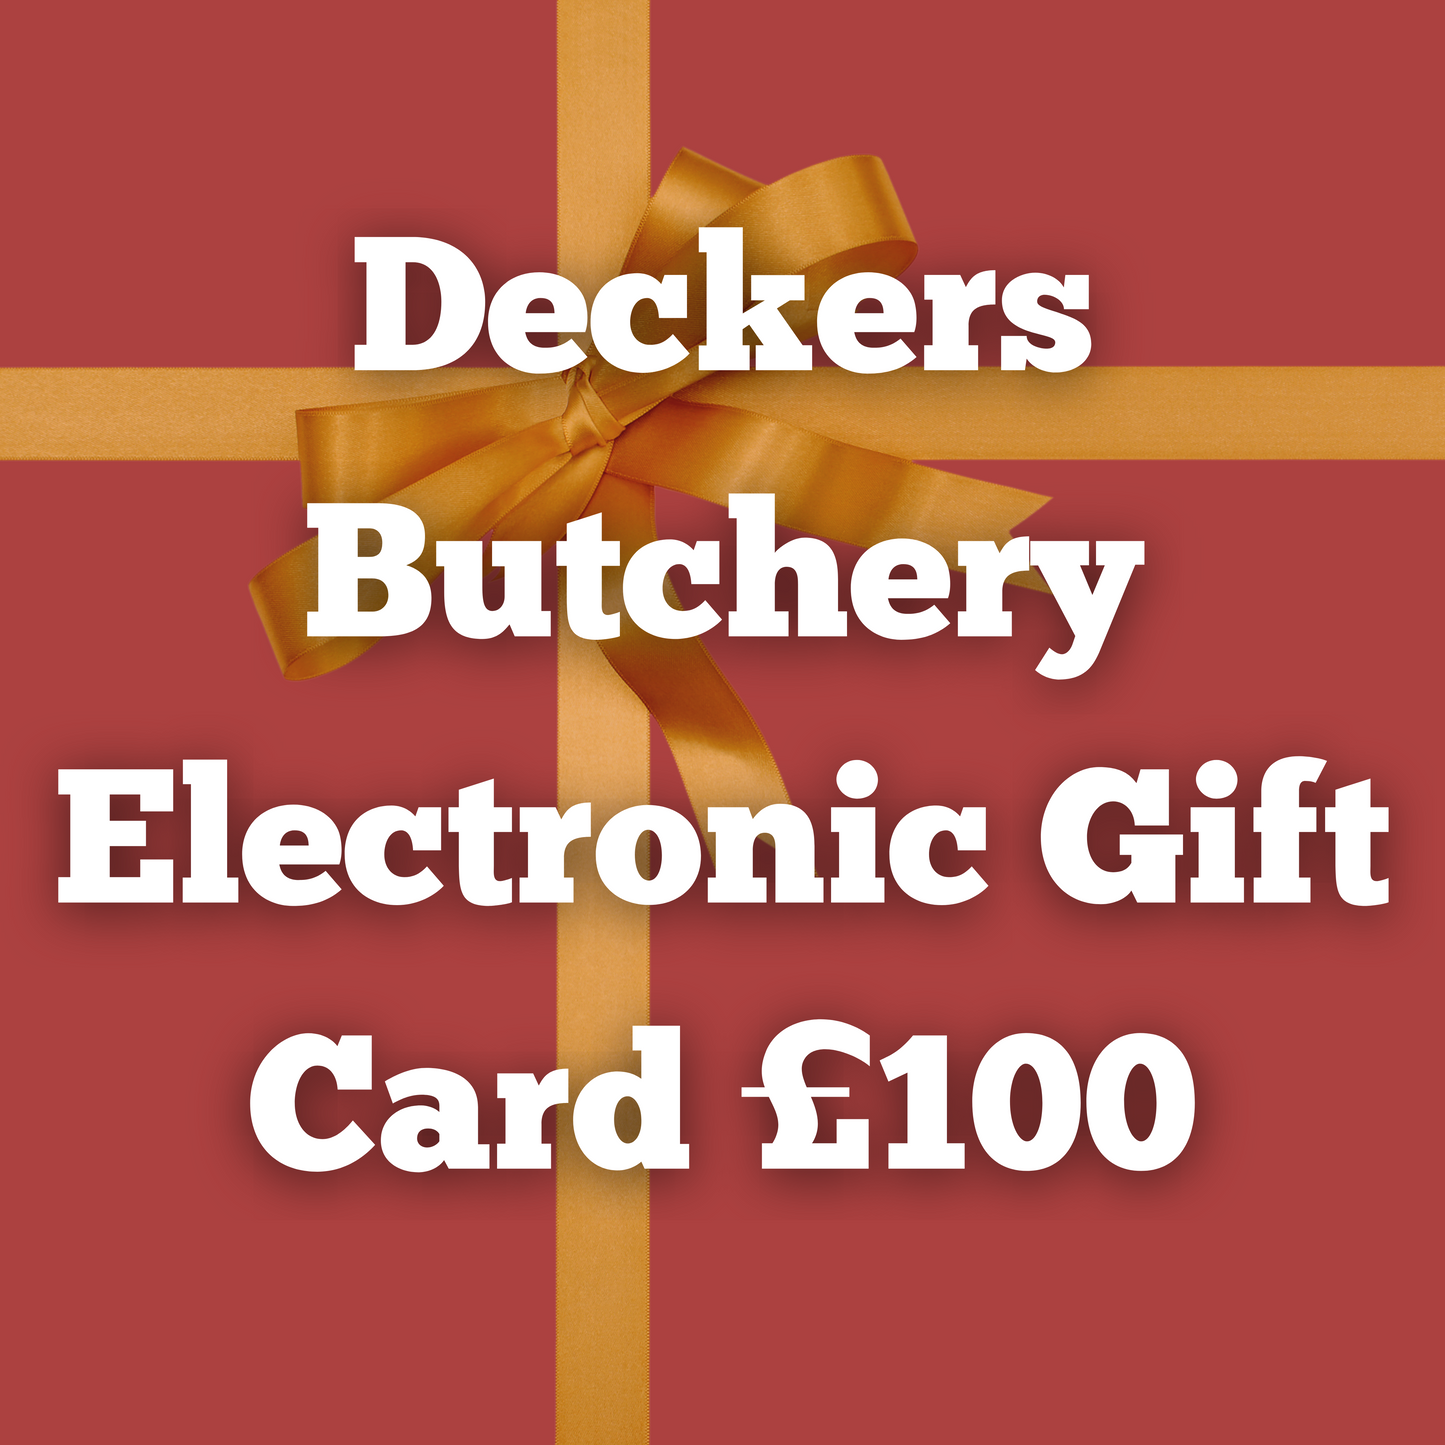 Deckers Butchery Electronic Gift Cards